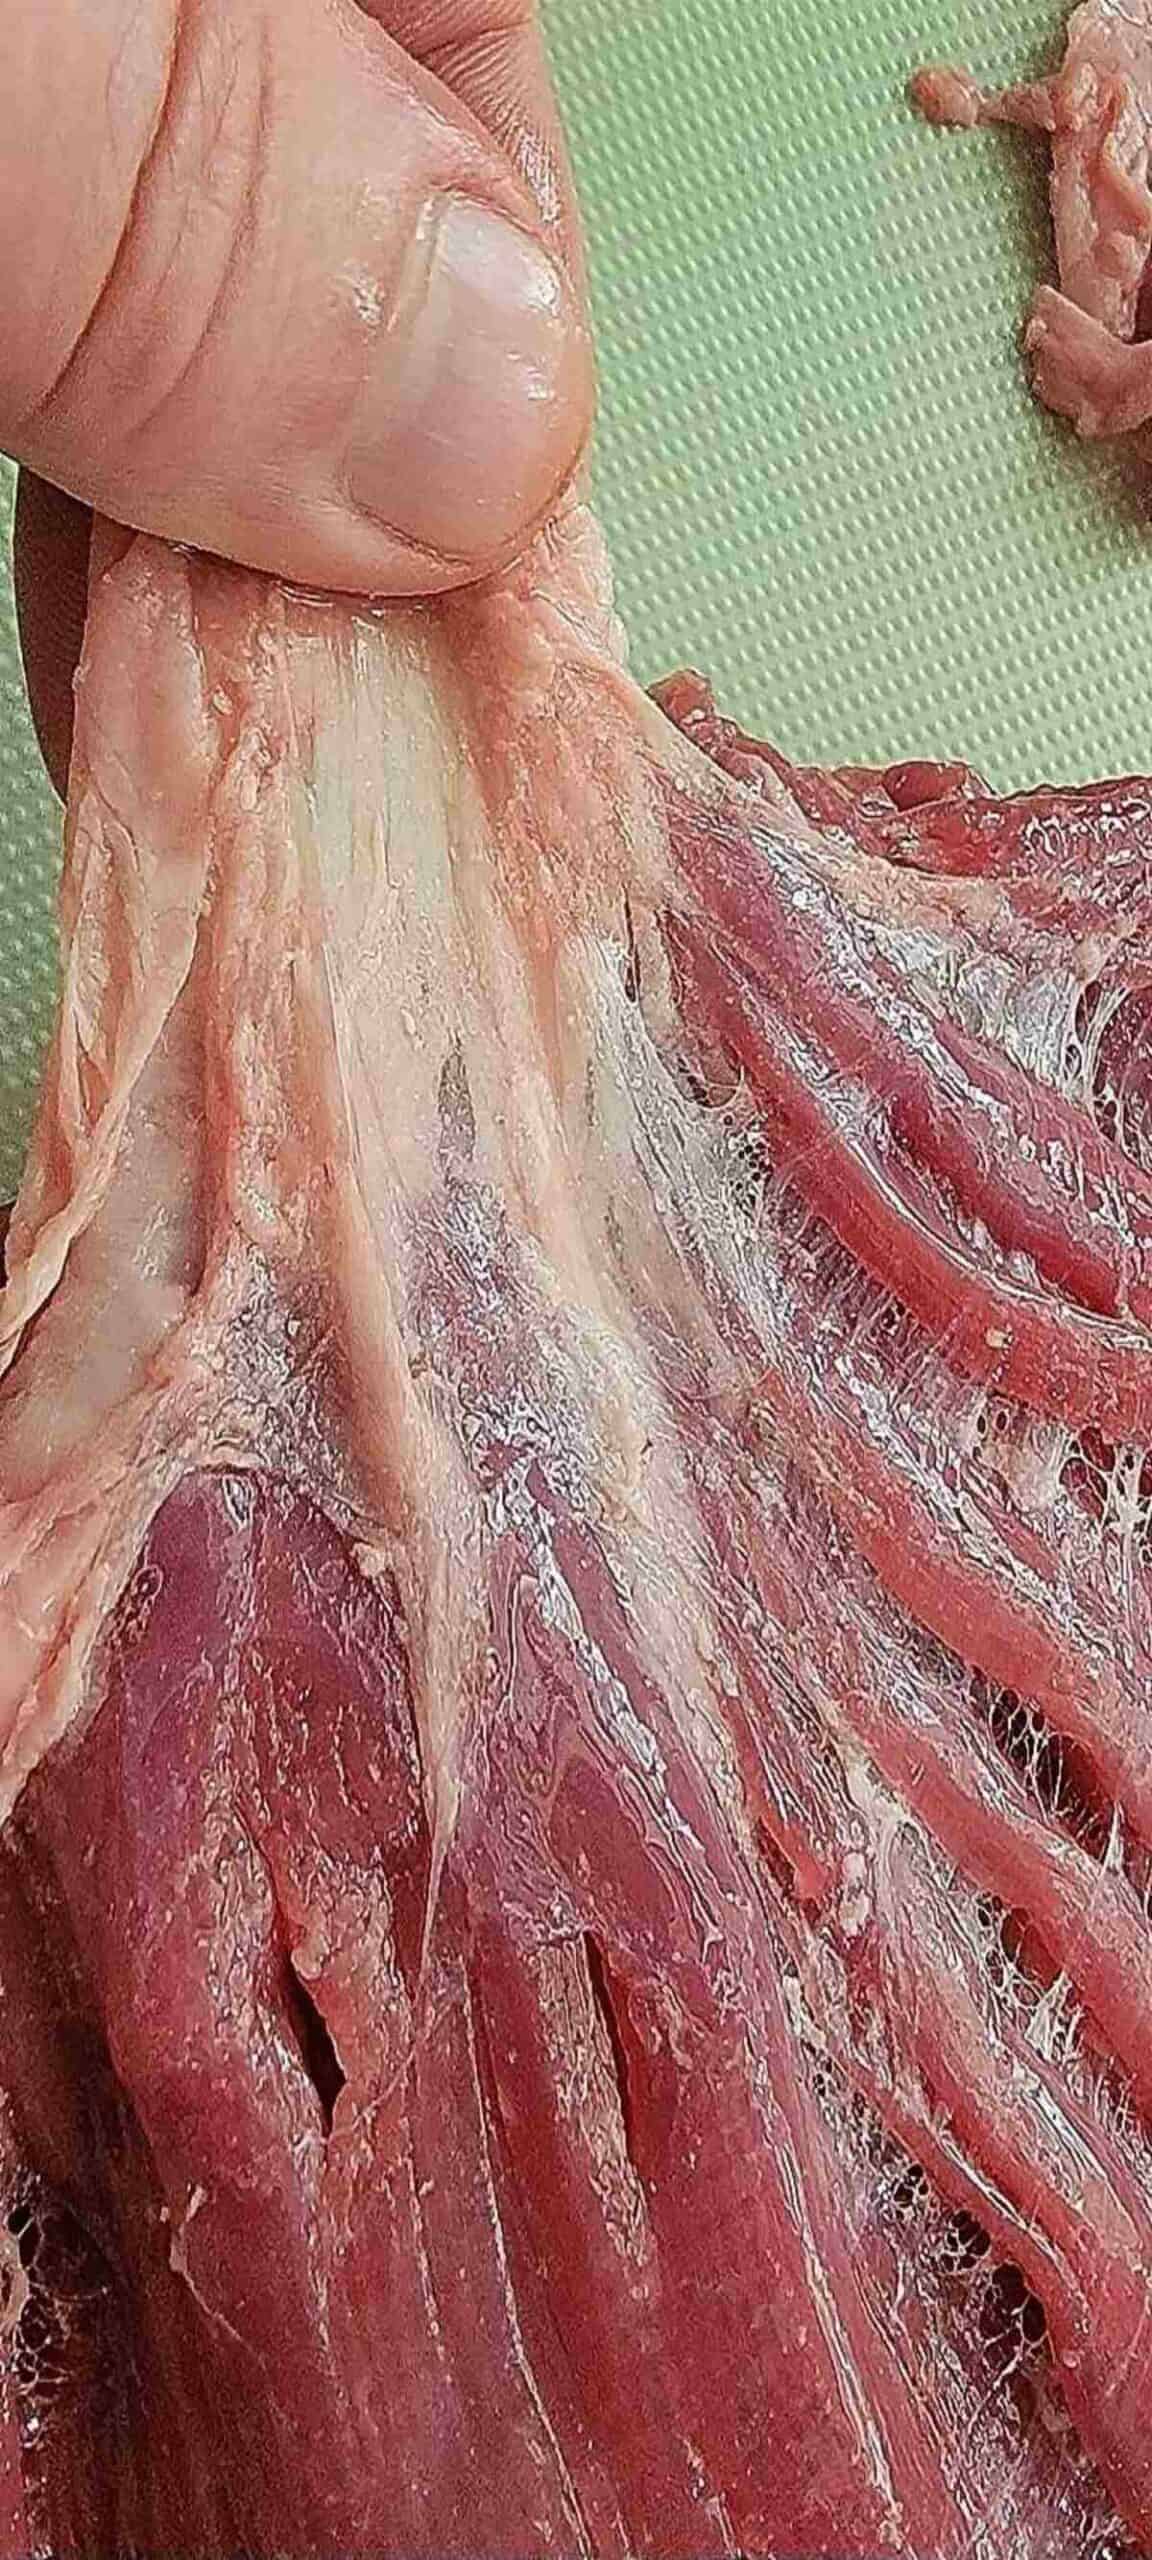 loose fat and sinew being pulled by hand from flank steak